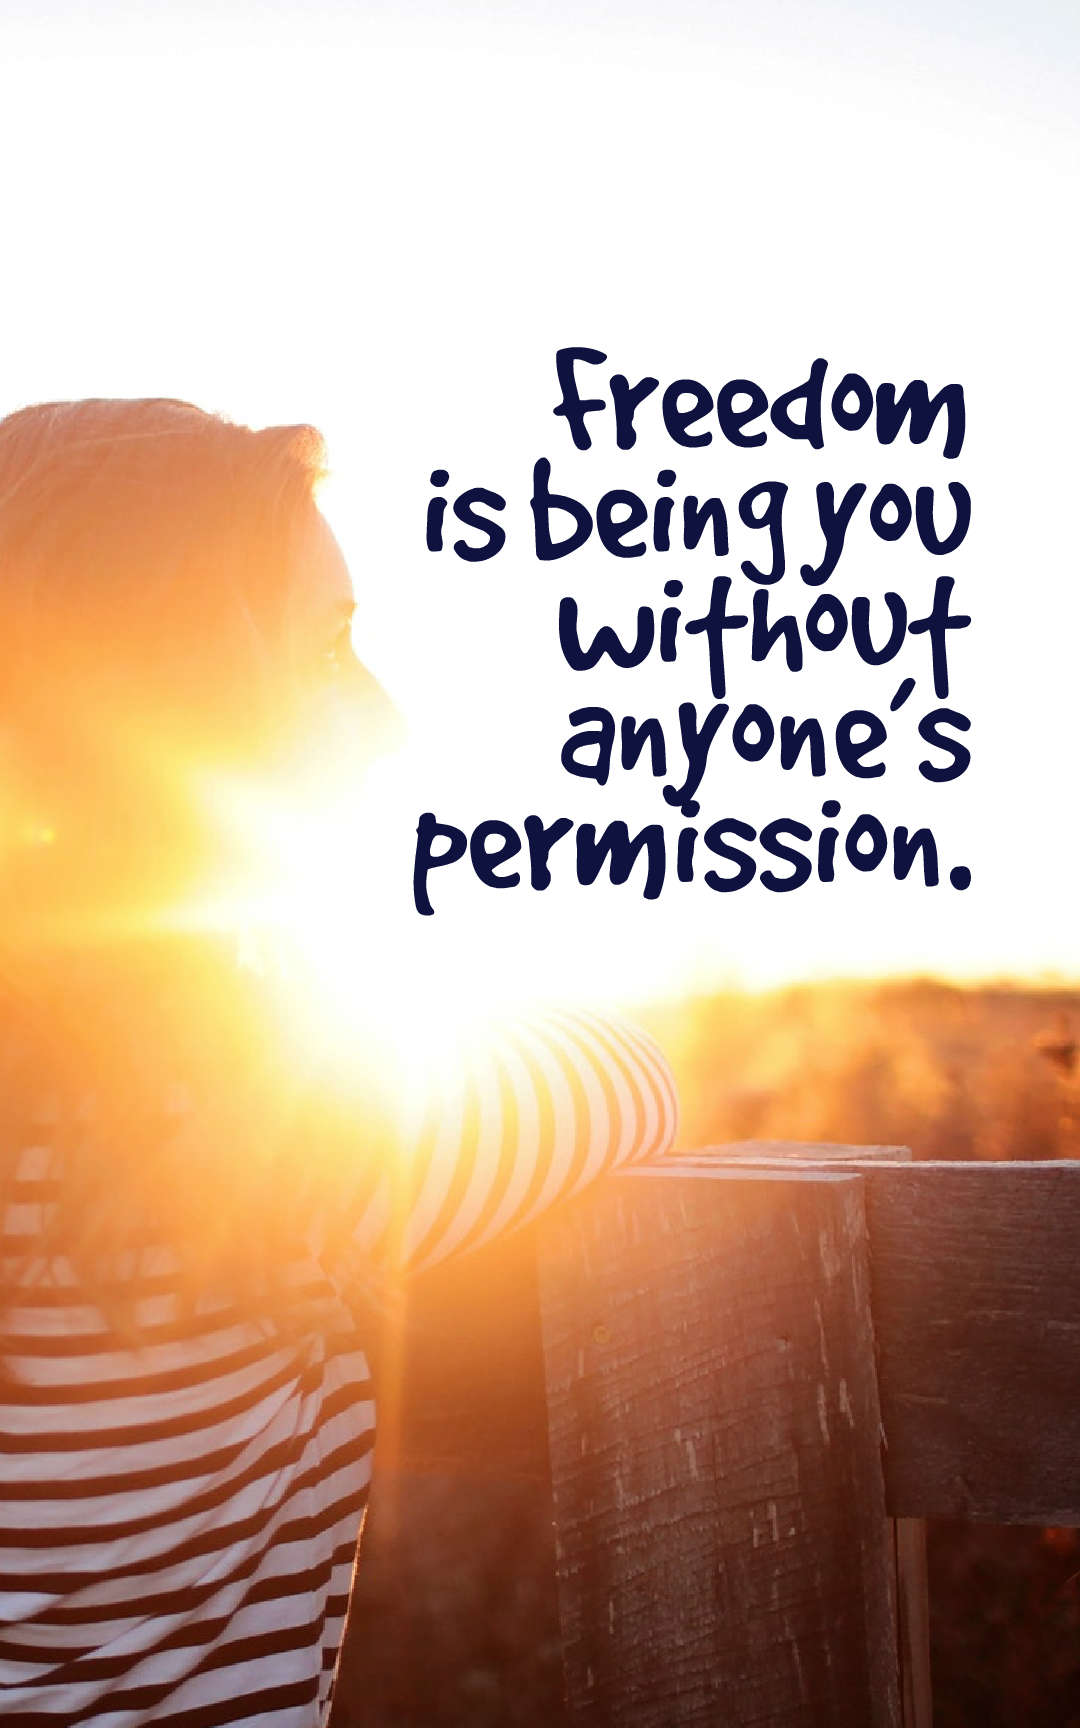 Freedom is being you without anyone’s permission.